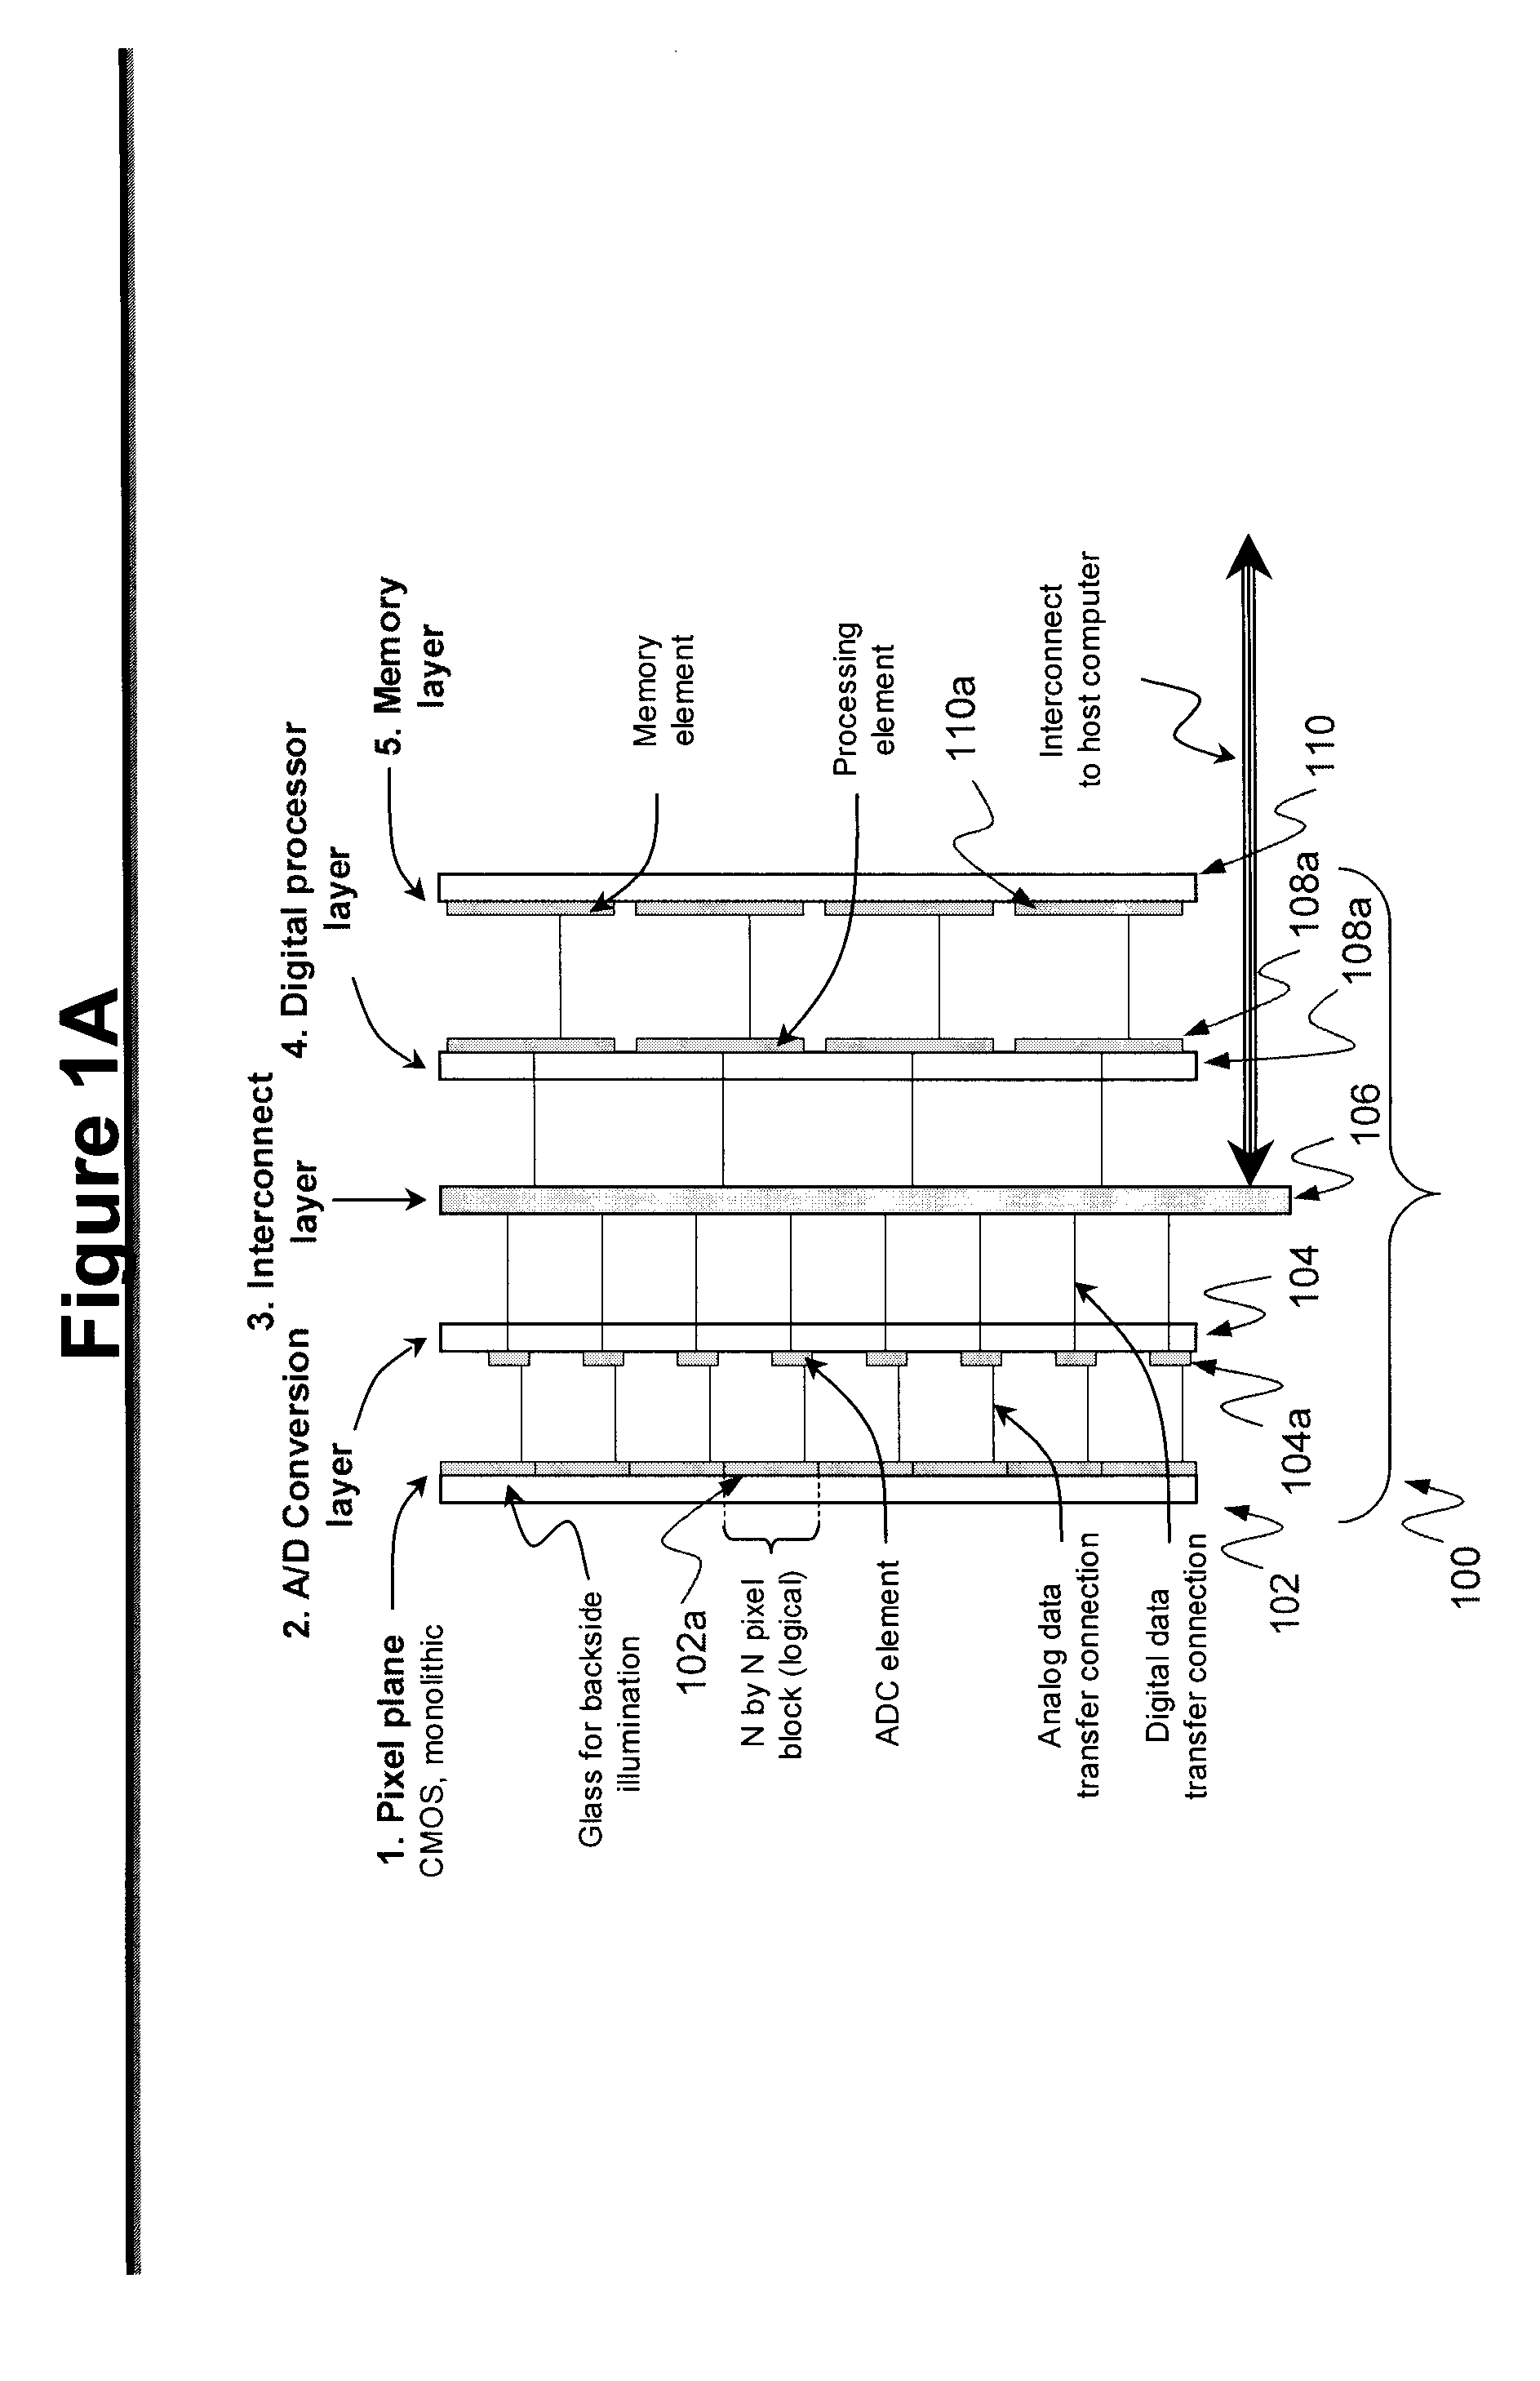 System and Method for High Performance Image Processing